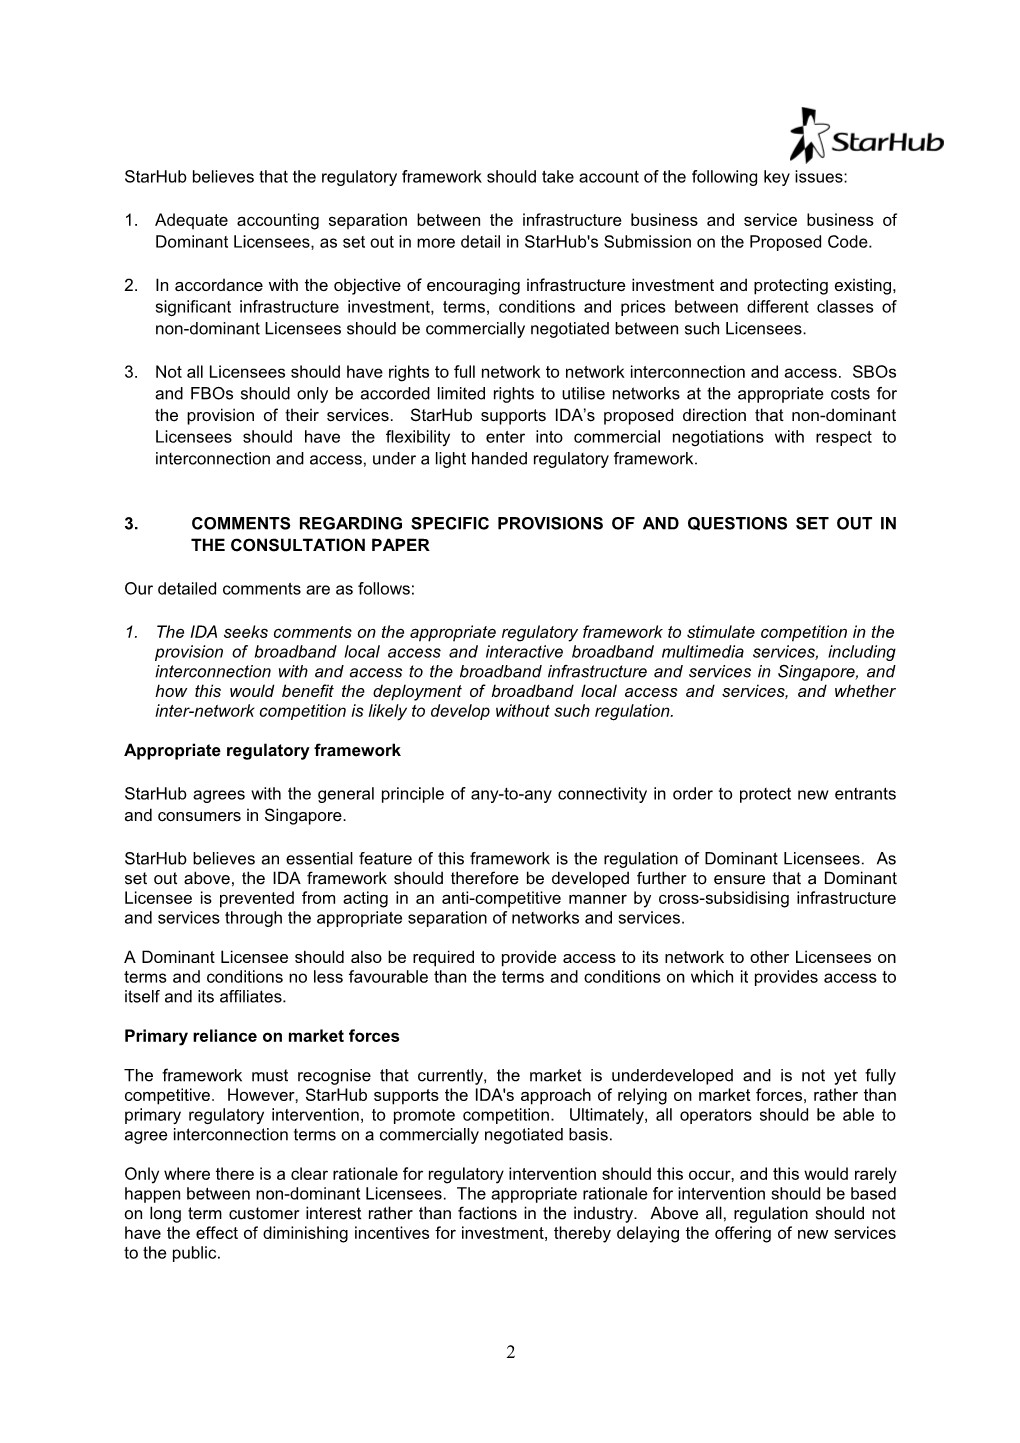 Starhub - Submission on IDA Interconnection/Access Consultation Paper